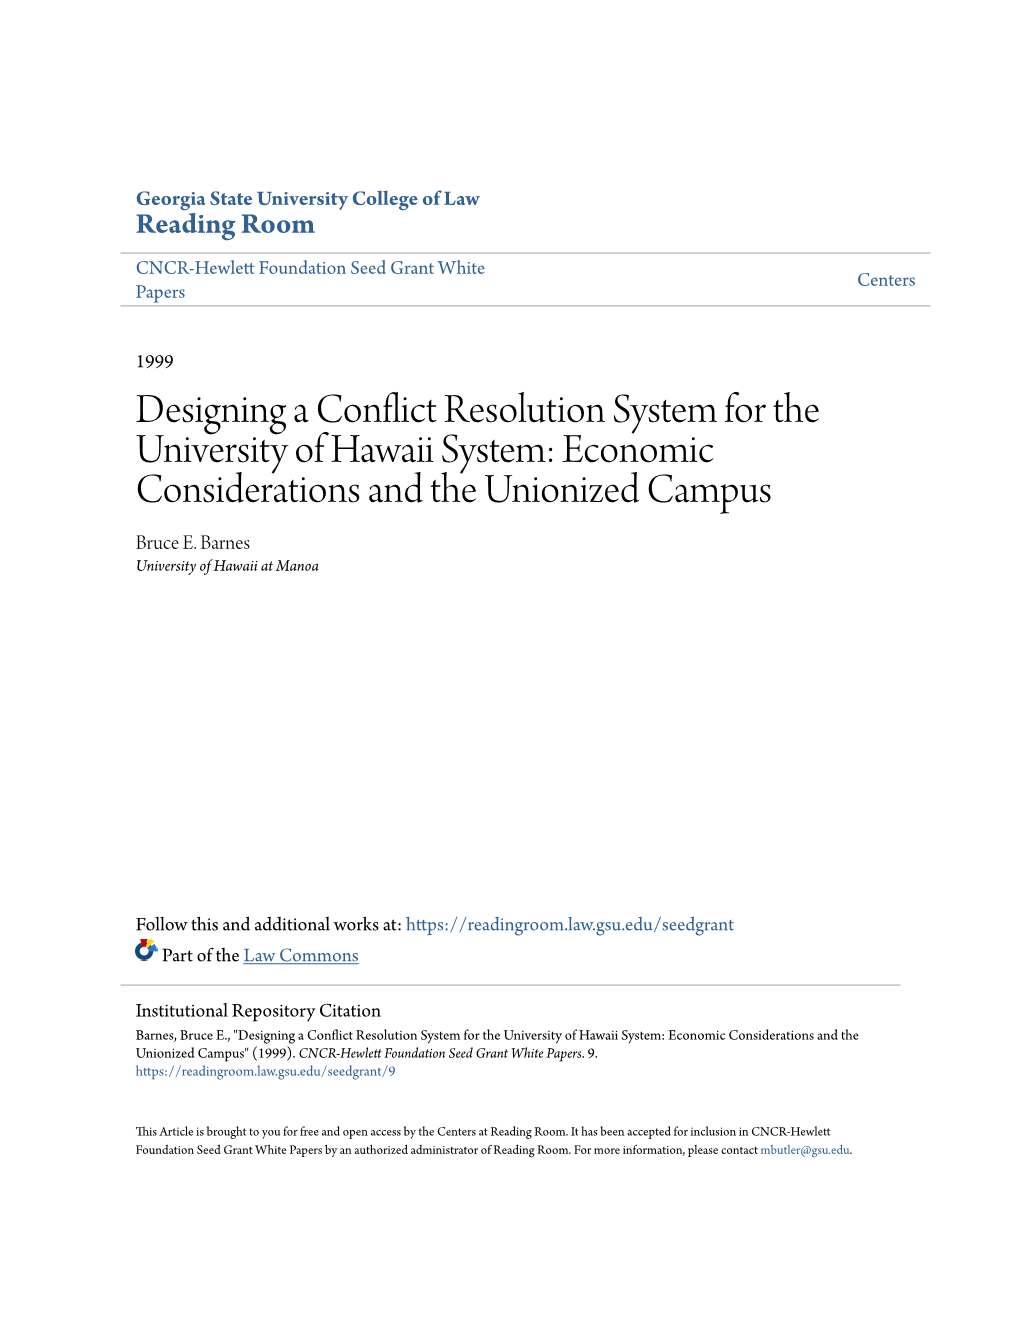 Designing a Conflict Resolution System for the University of Hawaii System: Economic Considerations and the Unionized Campus Bruce E